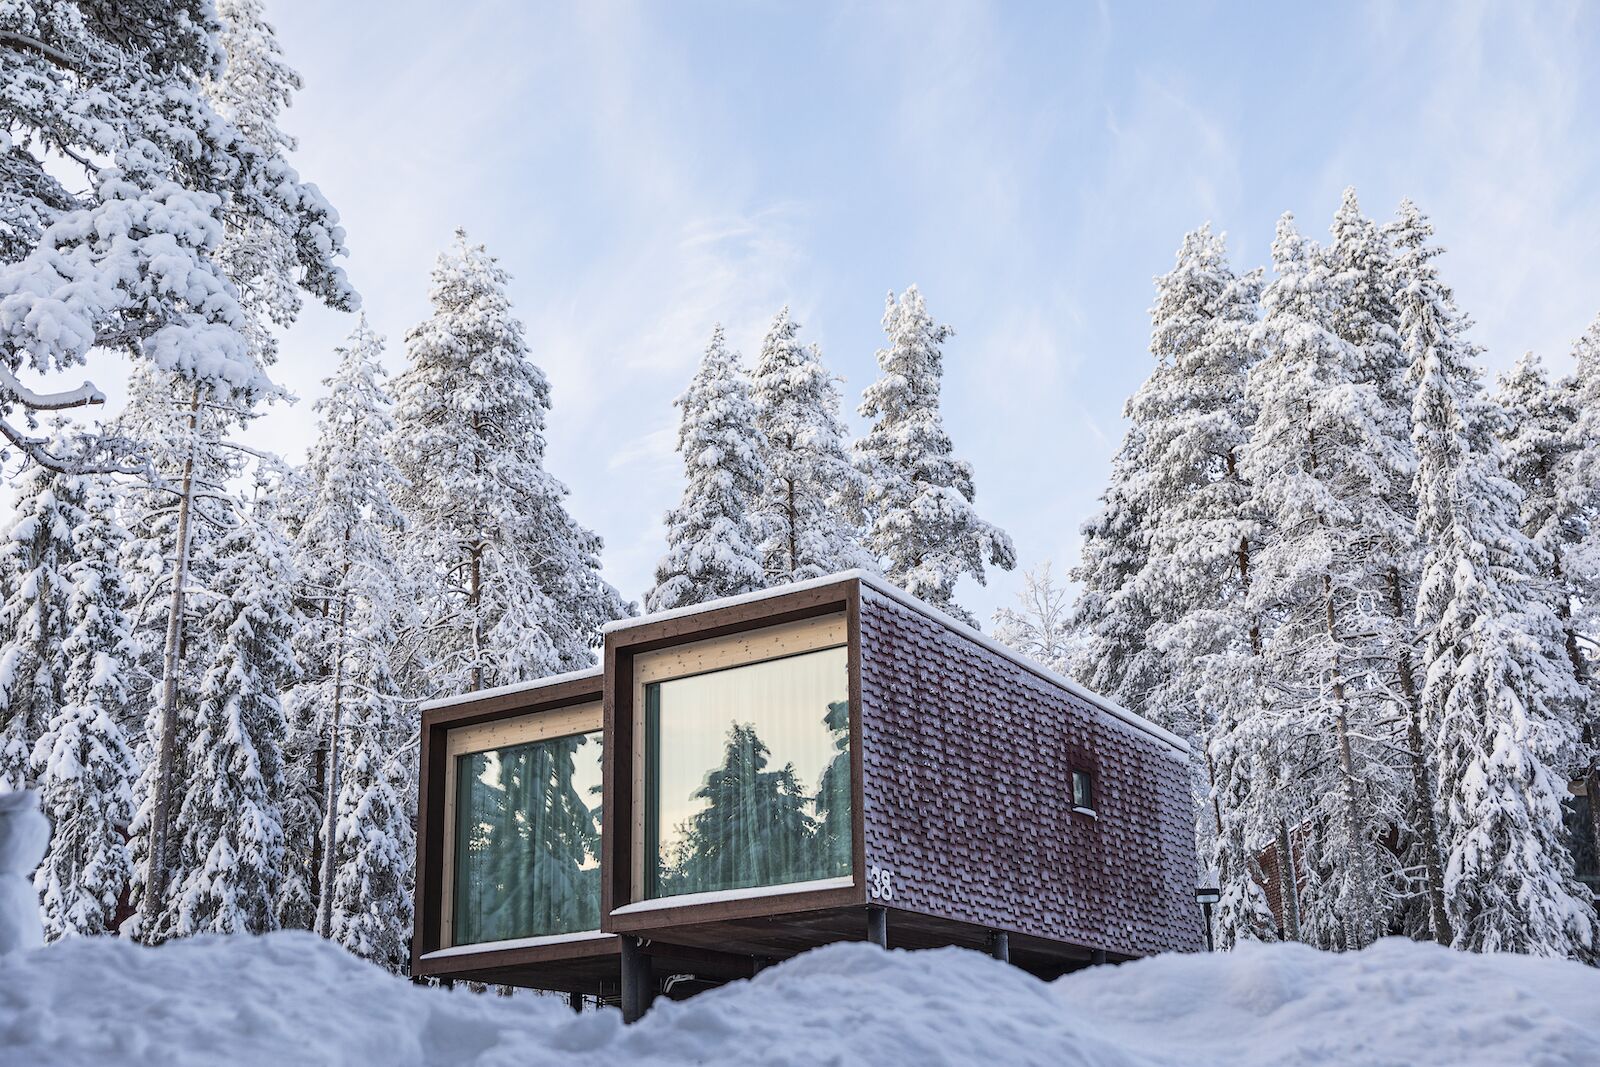 Arctic TreeHouse Hotel in the winter